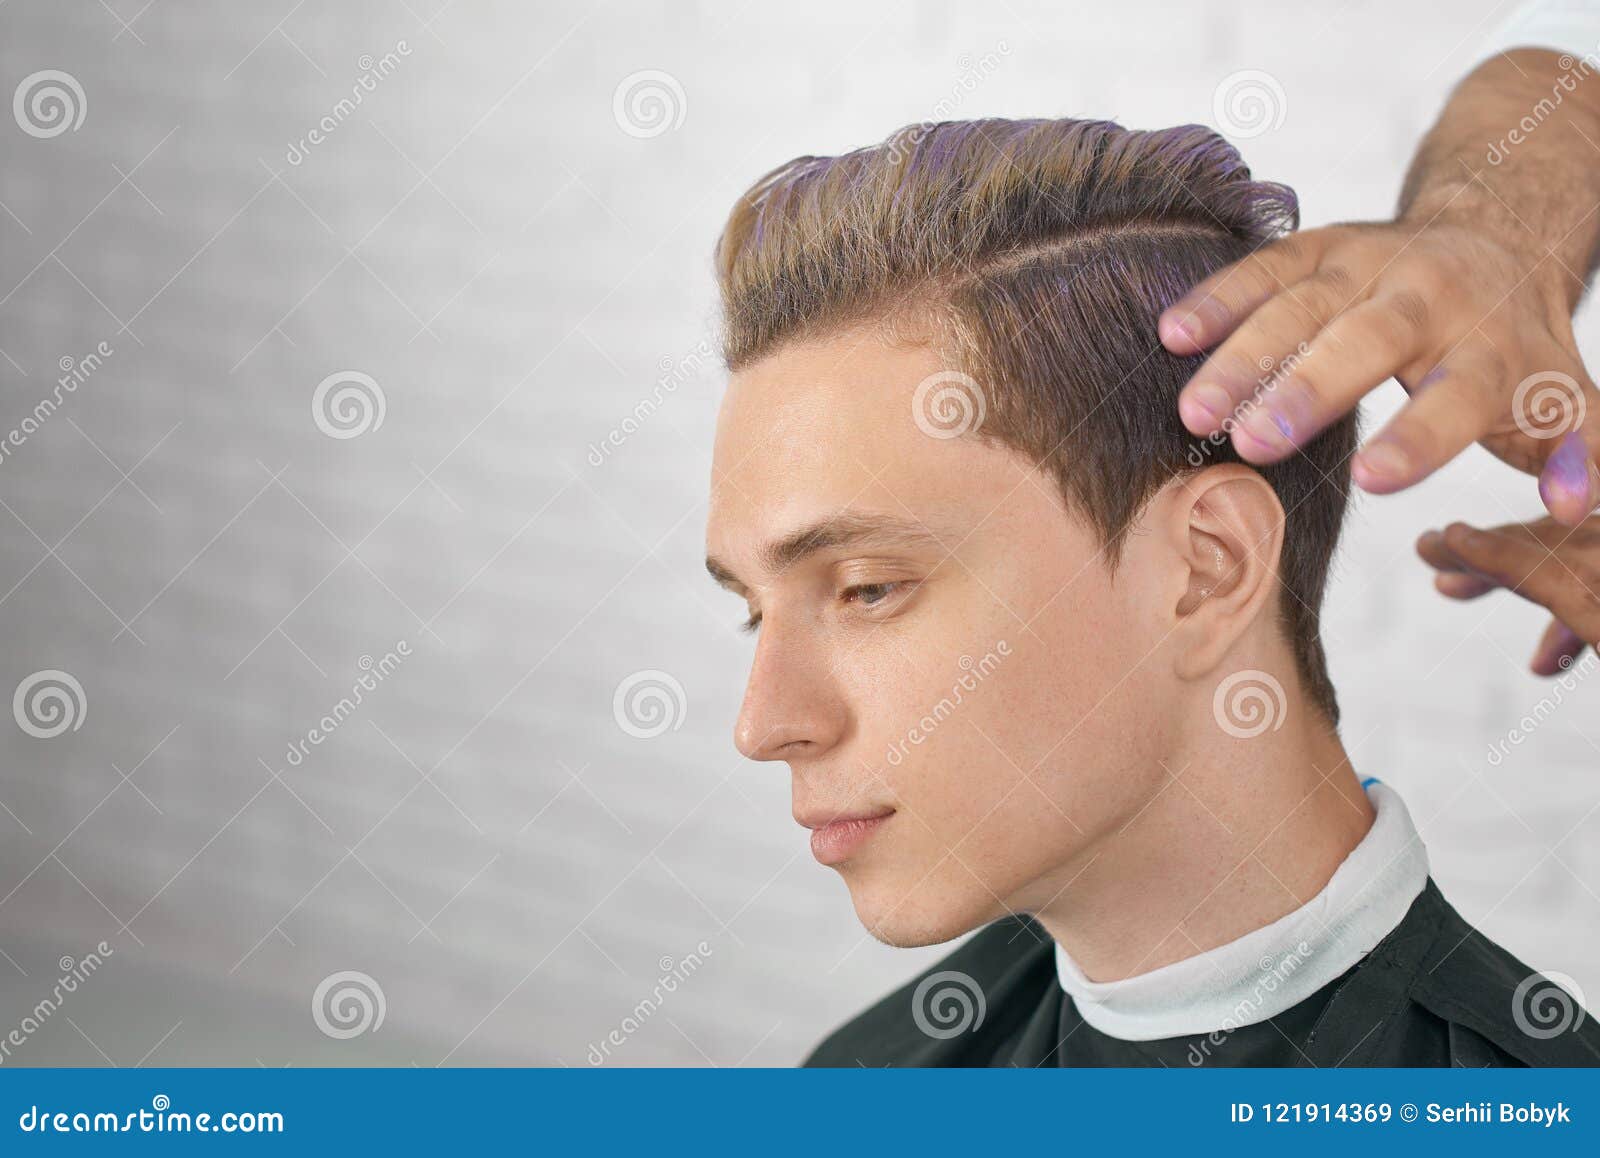 Download Boys Hairstyle: Selfie Camera 1.0(1).apk for Android - apkdl.in